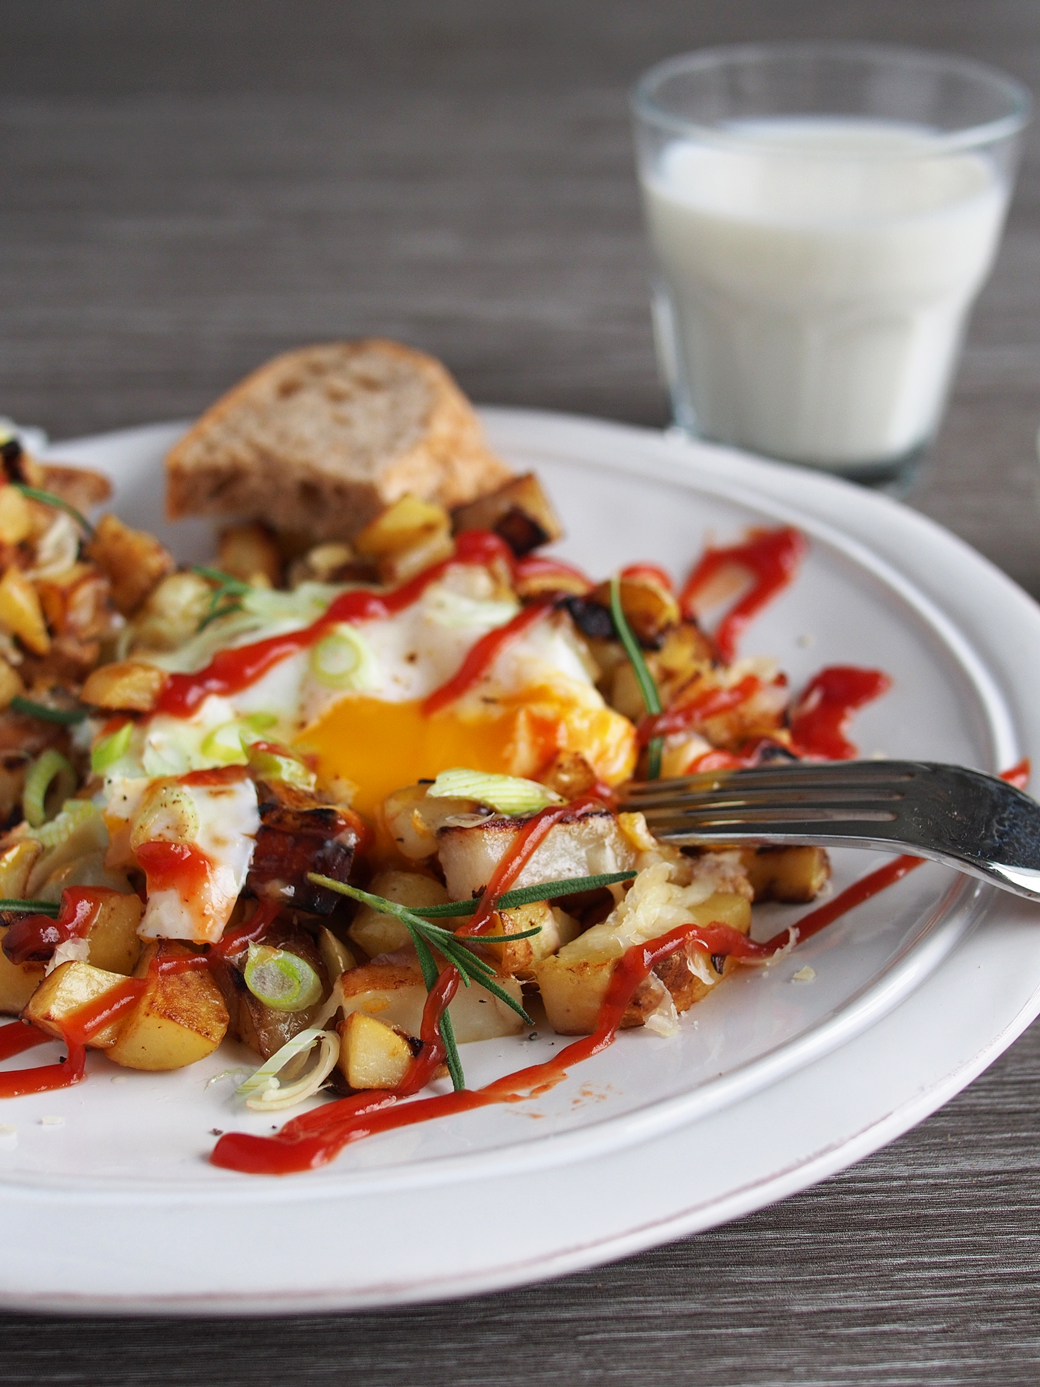 Skillet Potatoes and Eggs